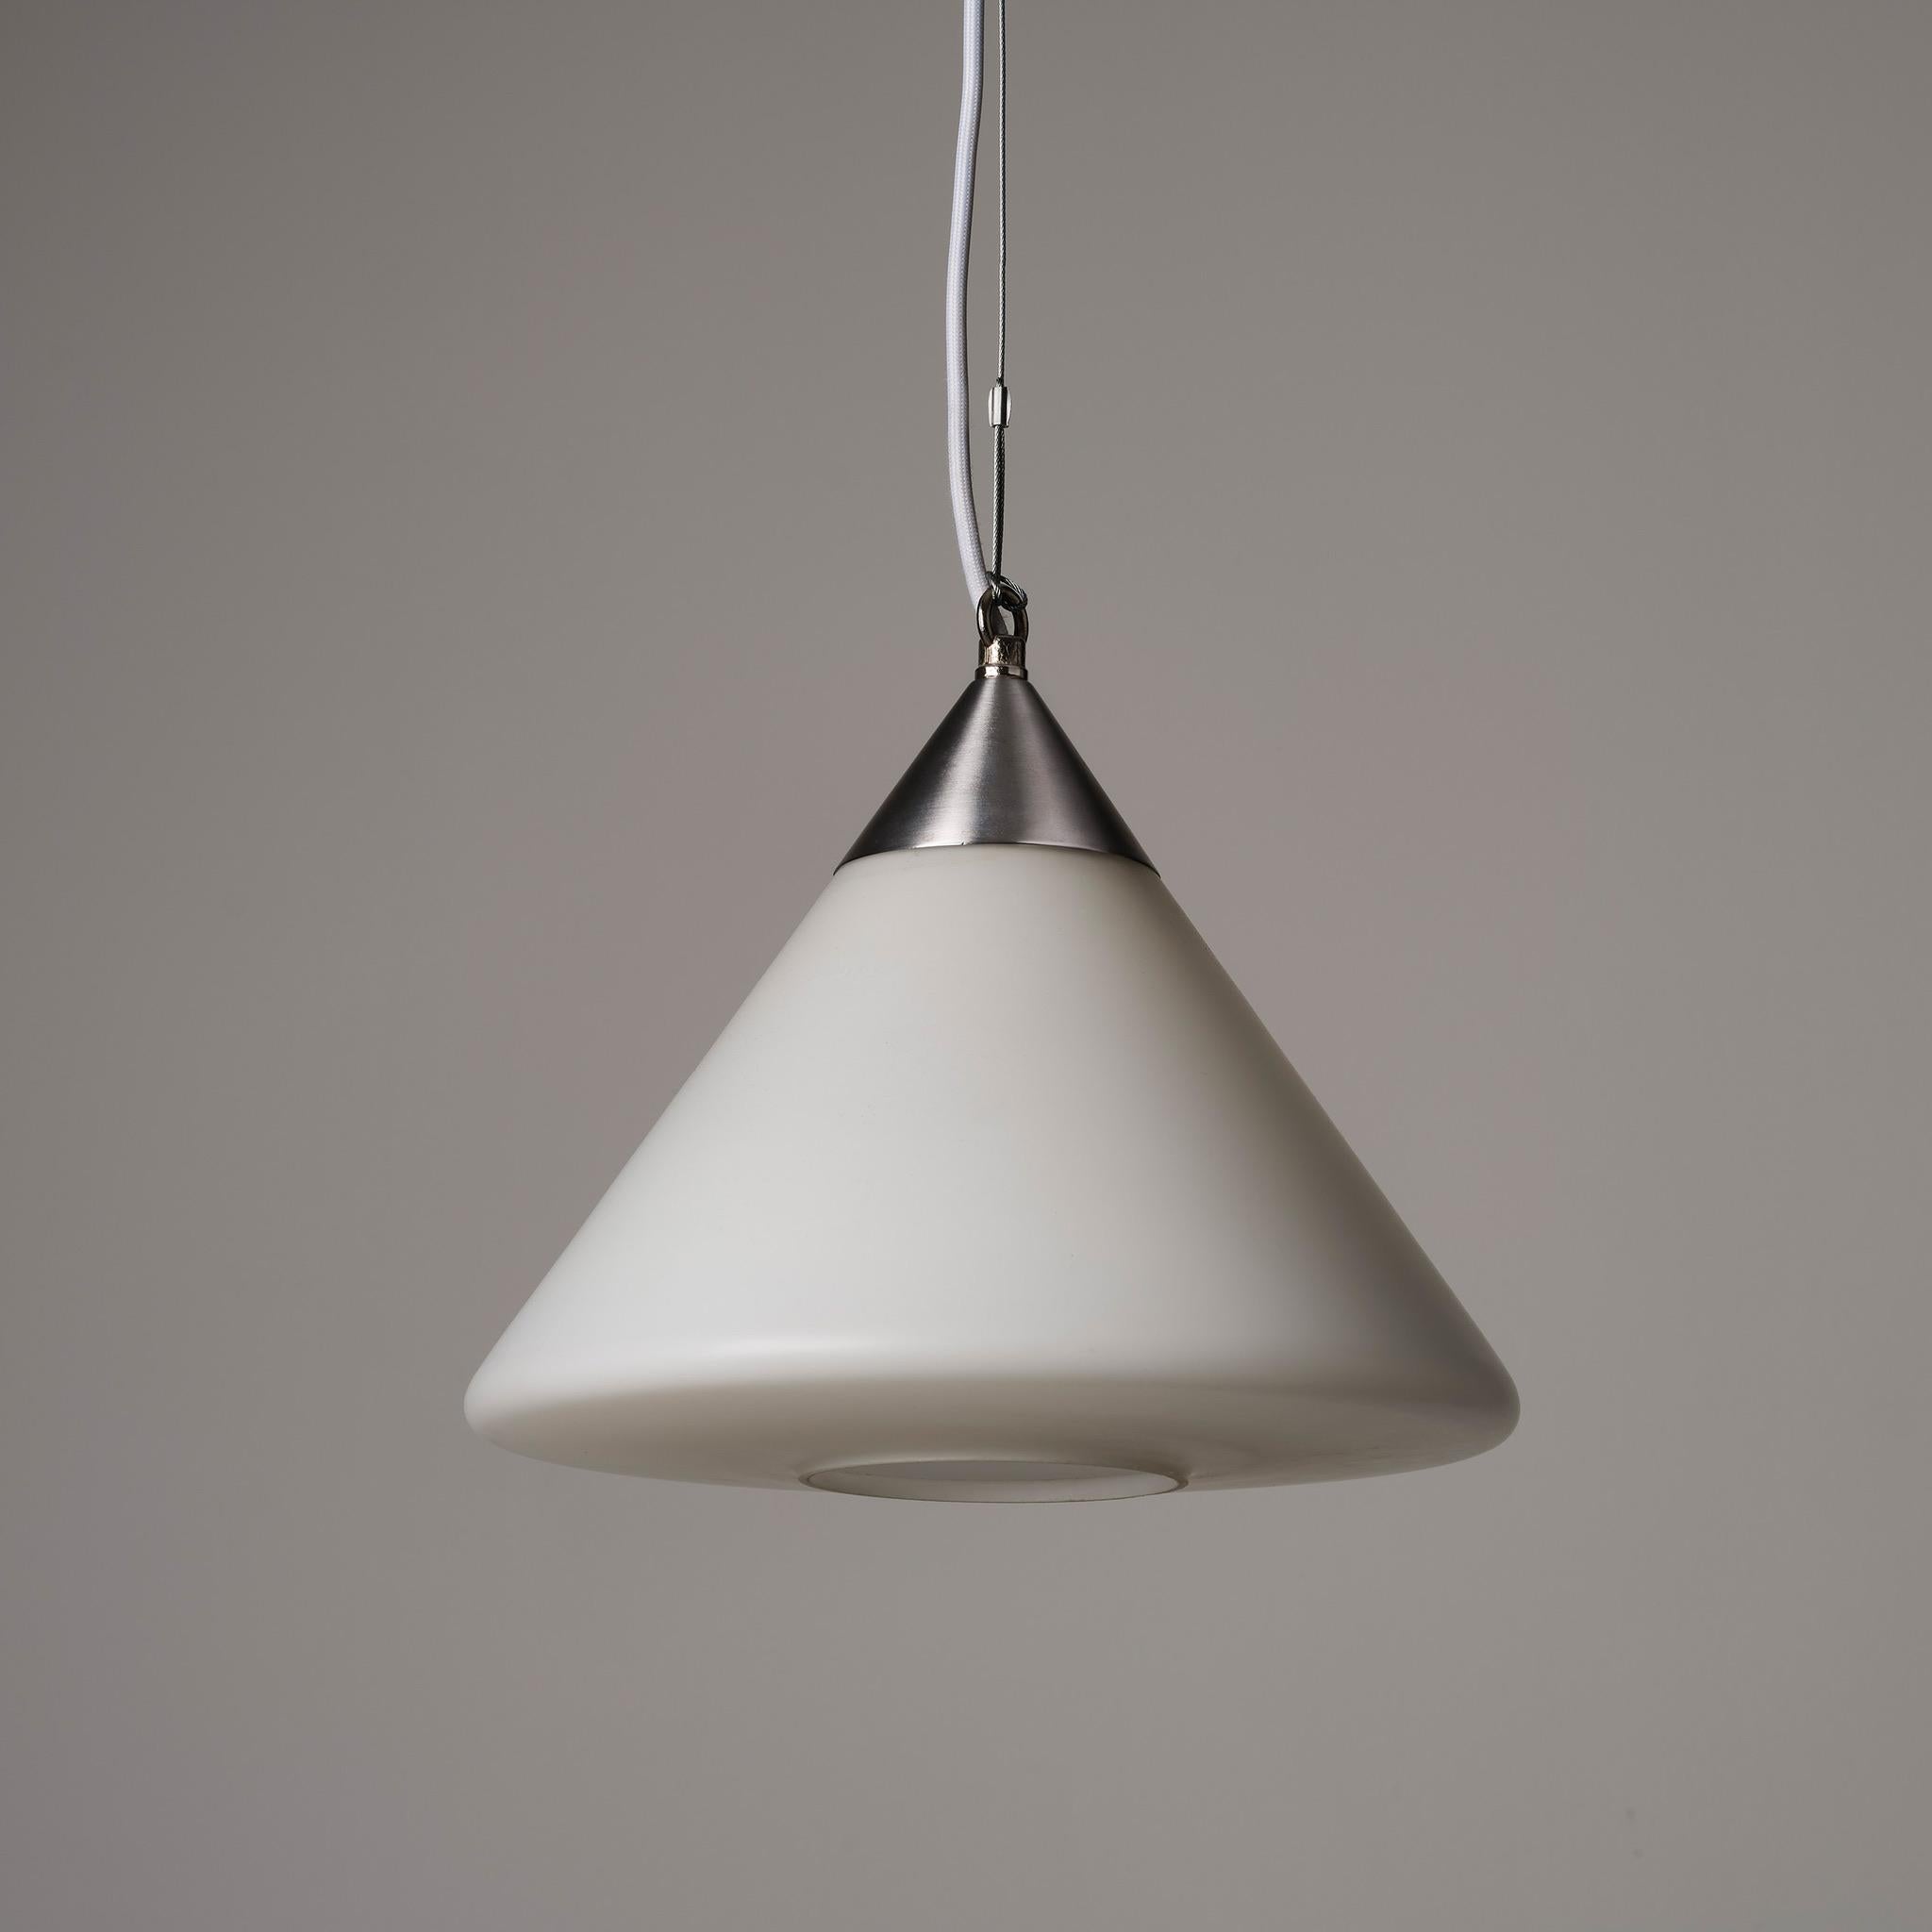 Vintage 1960’s white glass pendant lights salvaged from a school in the Midlands. Conical matt glass shades mounted on the original brushed steel galleries. The glass diffuses the light to a warm glow.